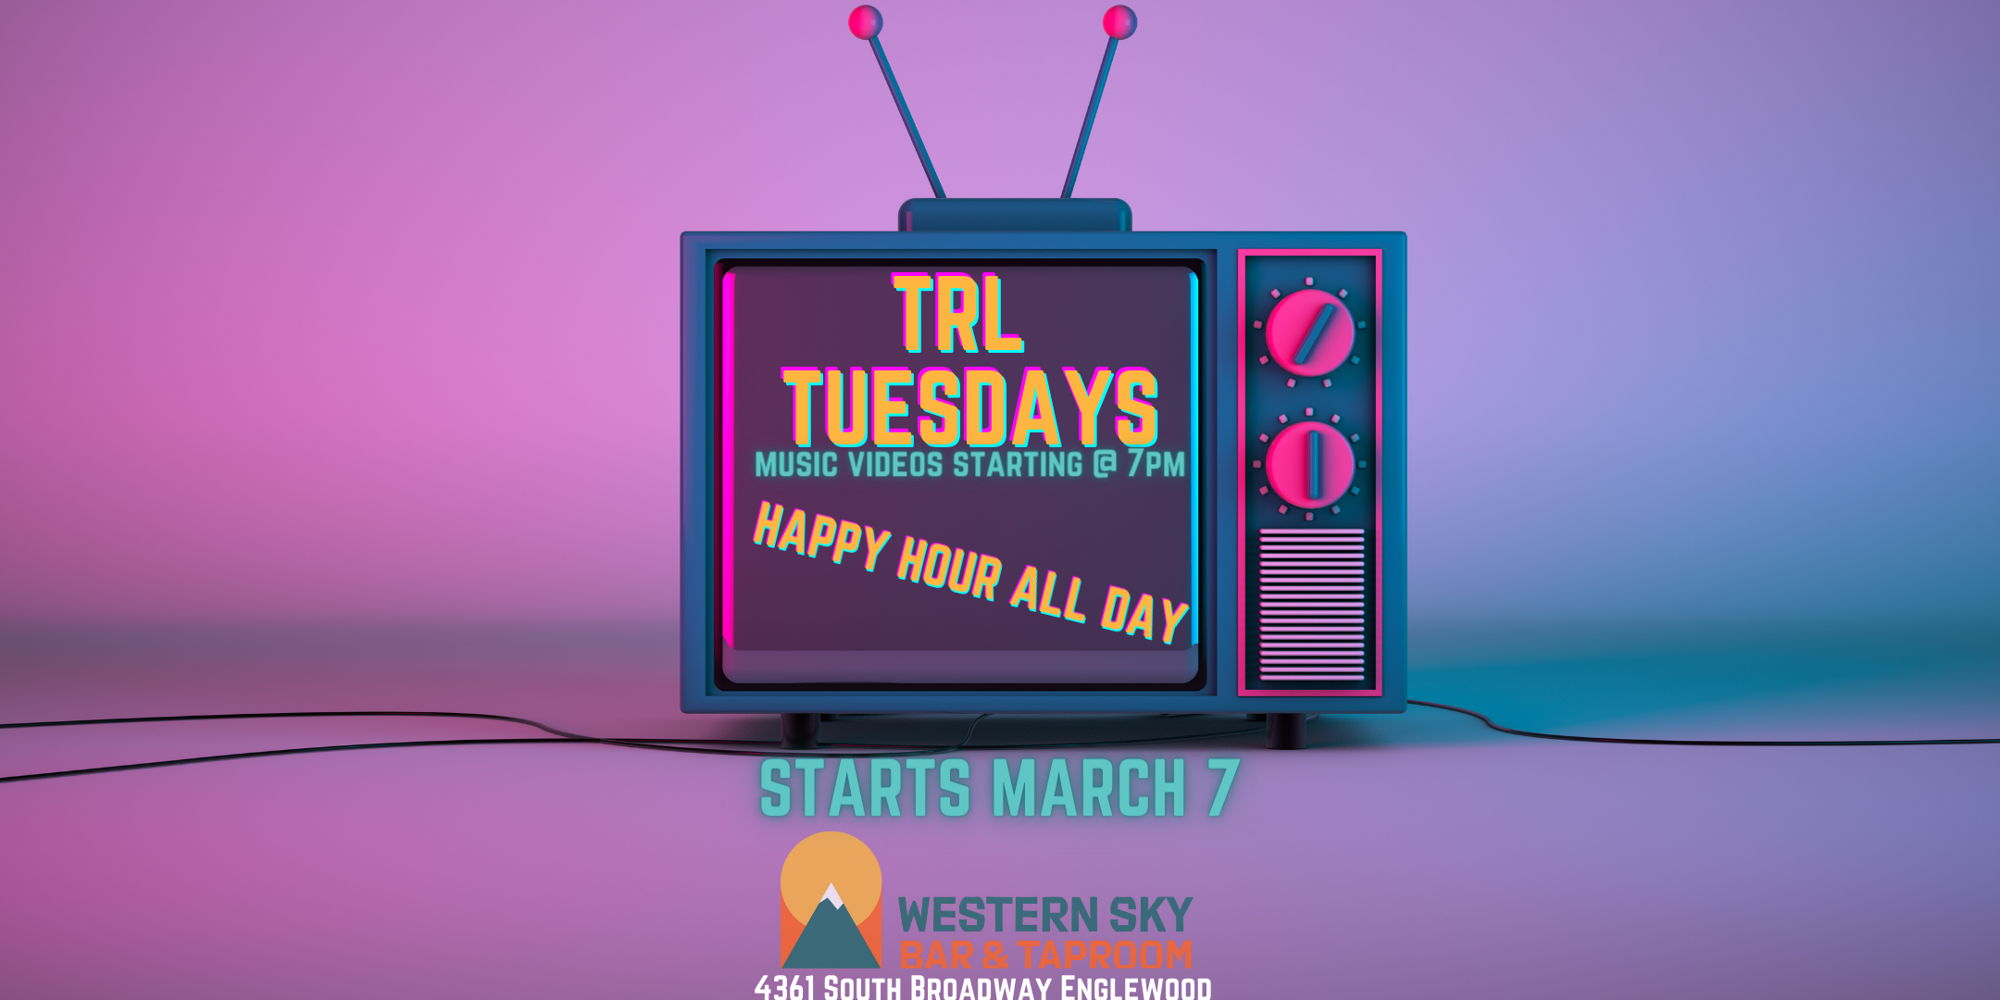 TRL Tuesdays at Western Sky promotional image